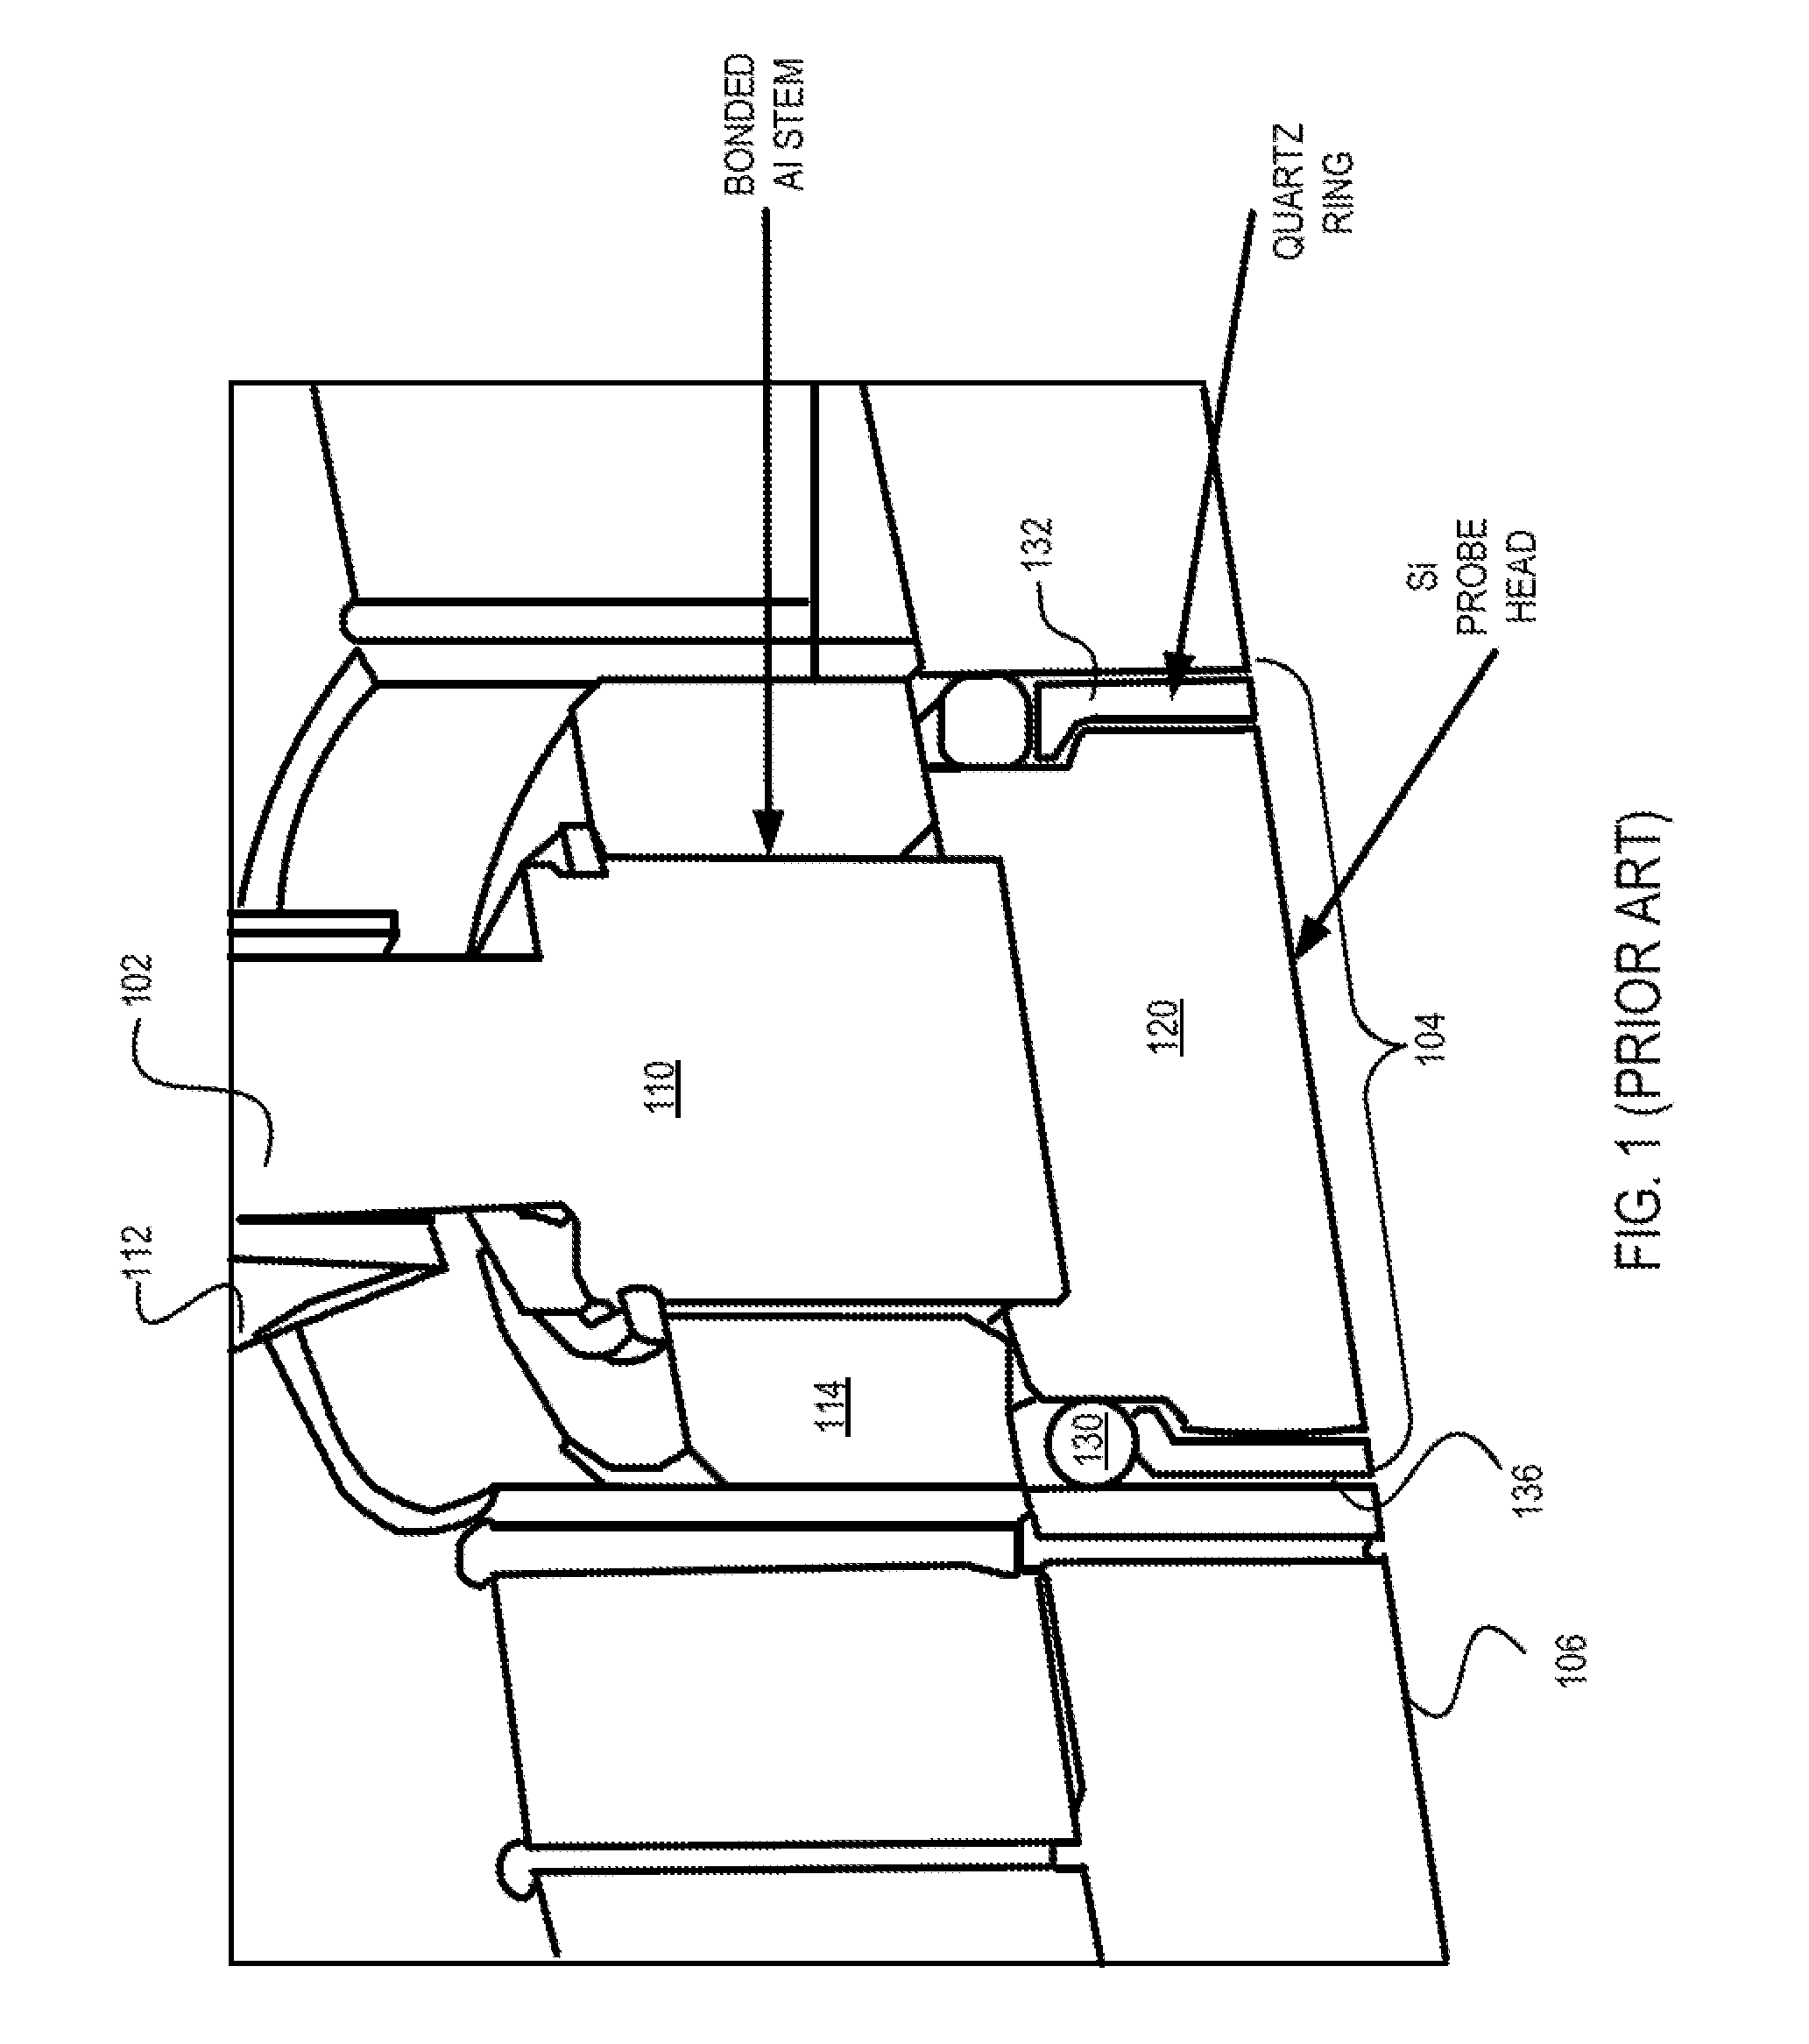 Plasma-facing probe arrangement including vacuum gap for use in a plasma processing chamber